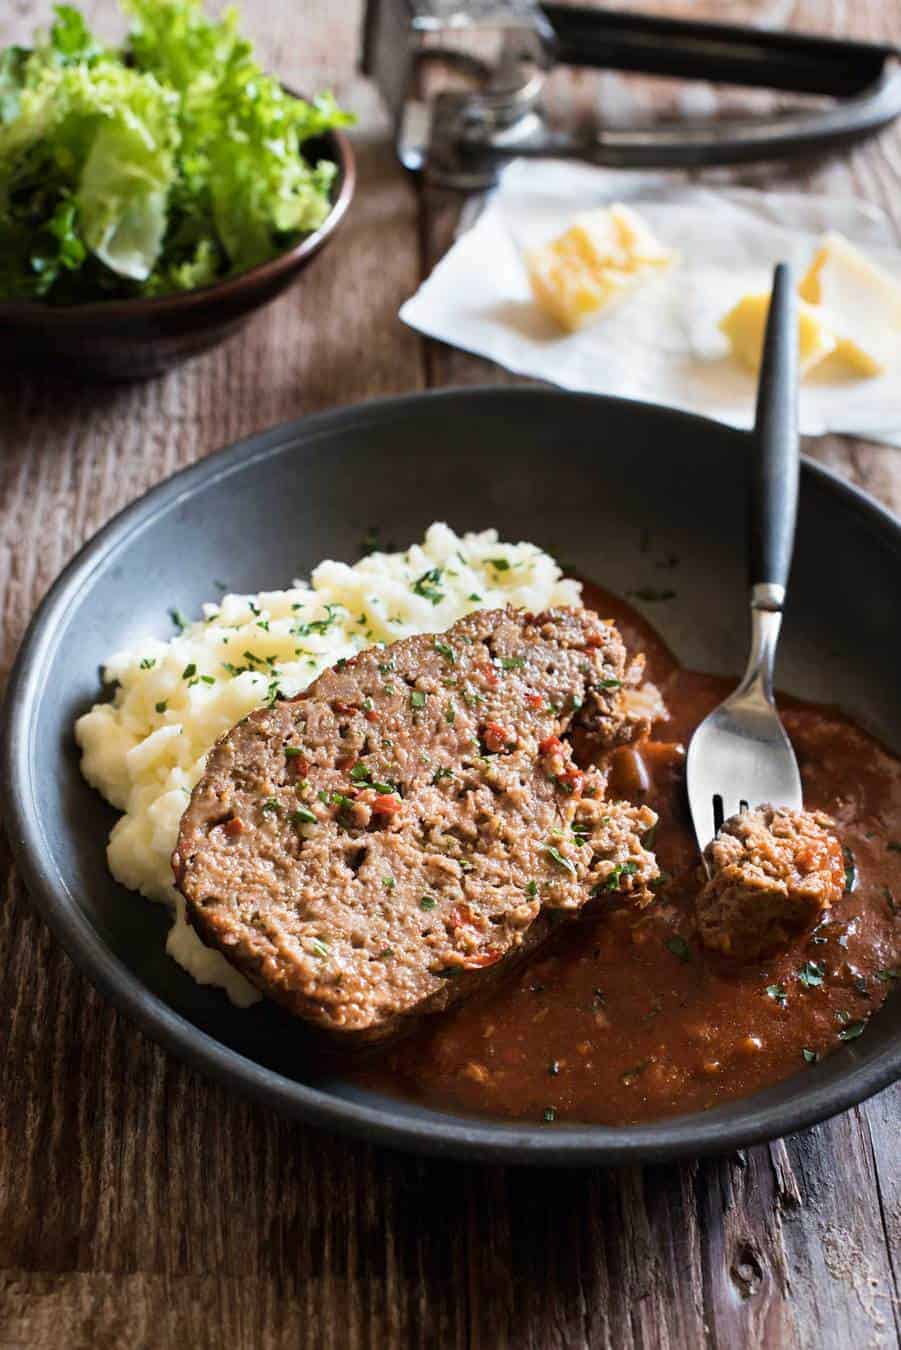 A slice of Italian meatloaf on creamy mashed potato, drizzled with tomato marinara sauce the meatloaf was cooked with.